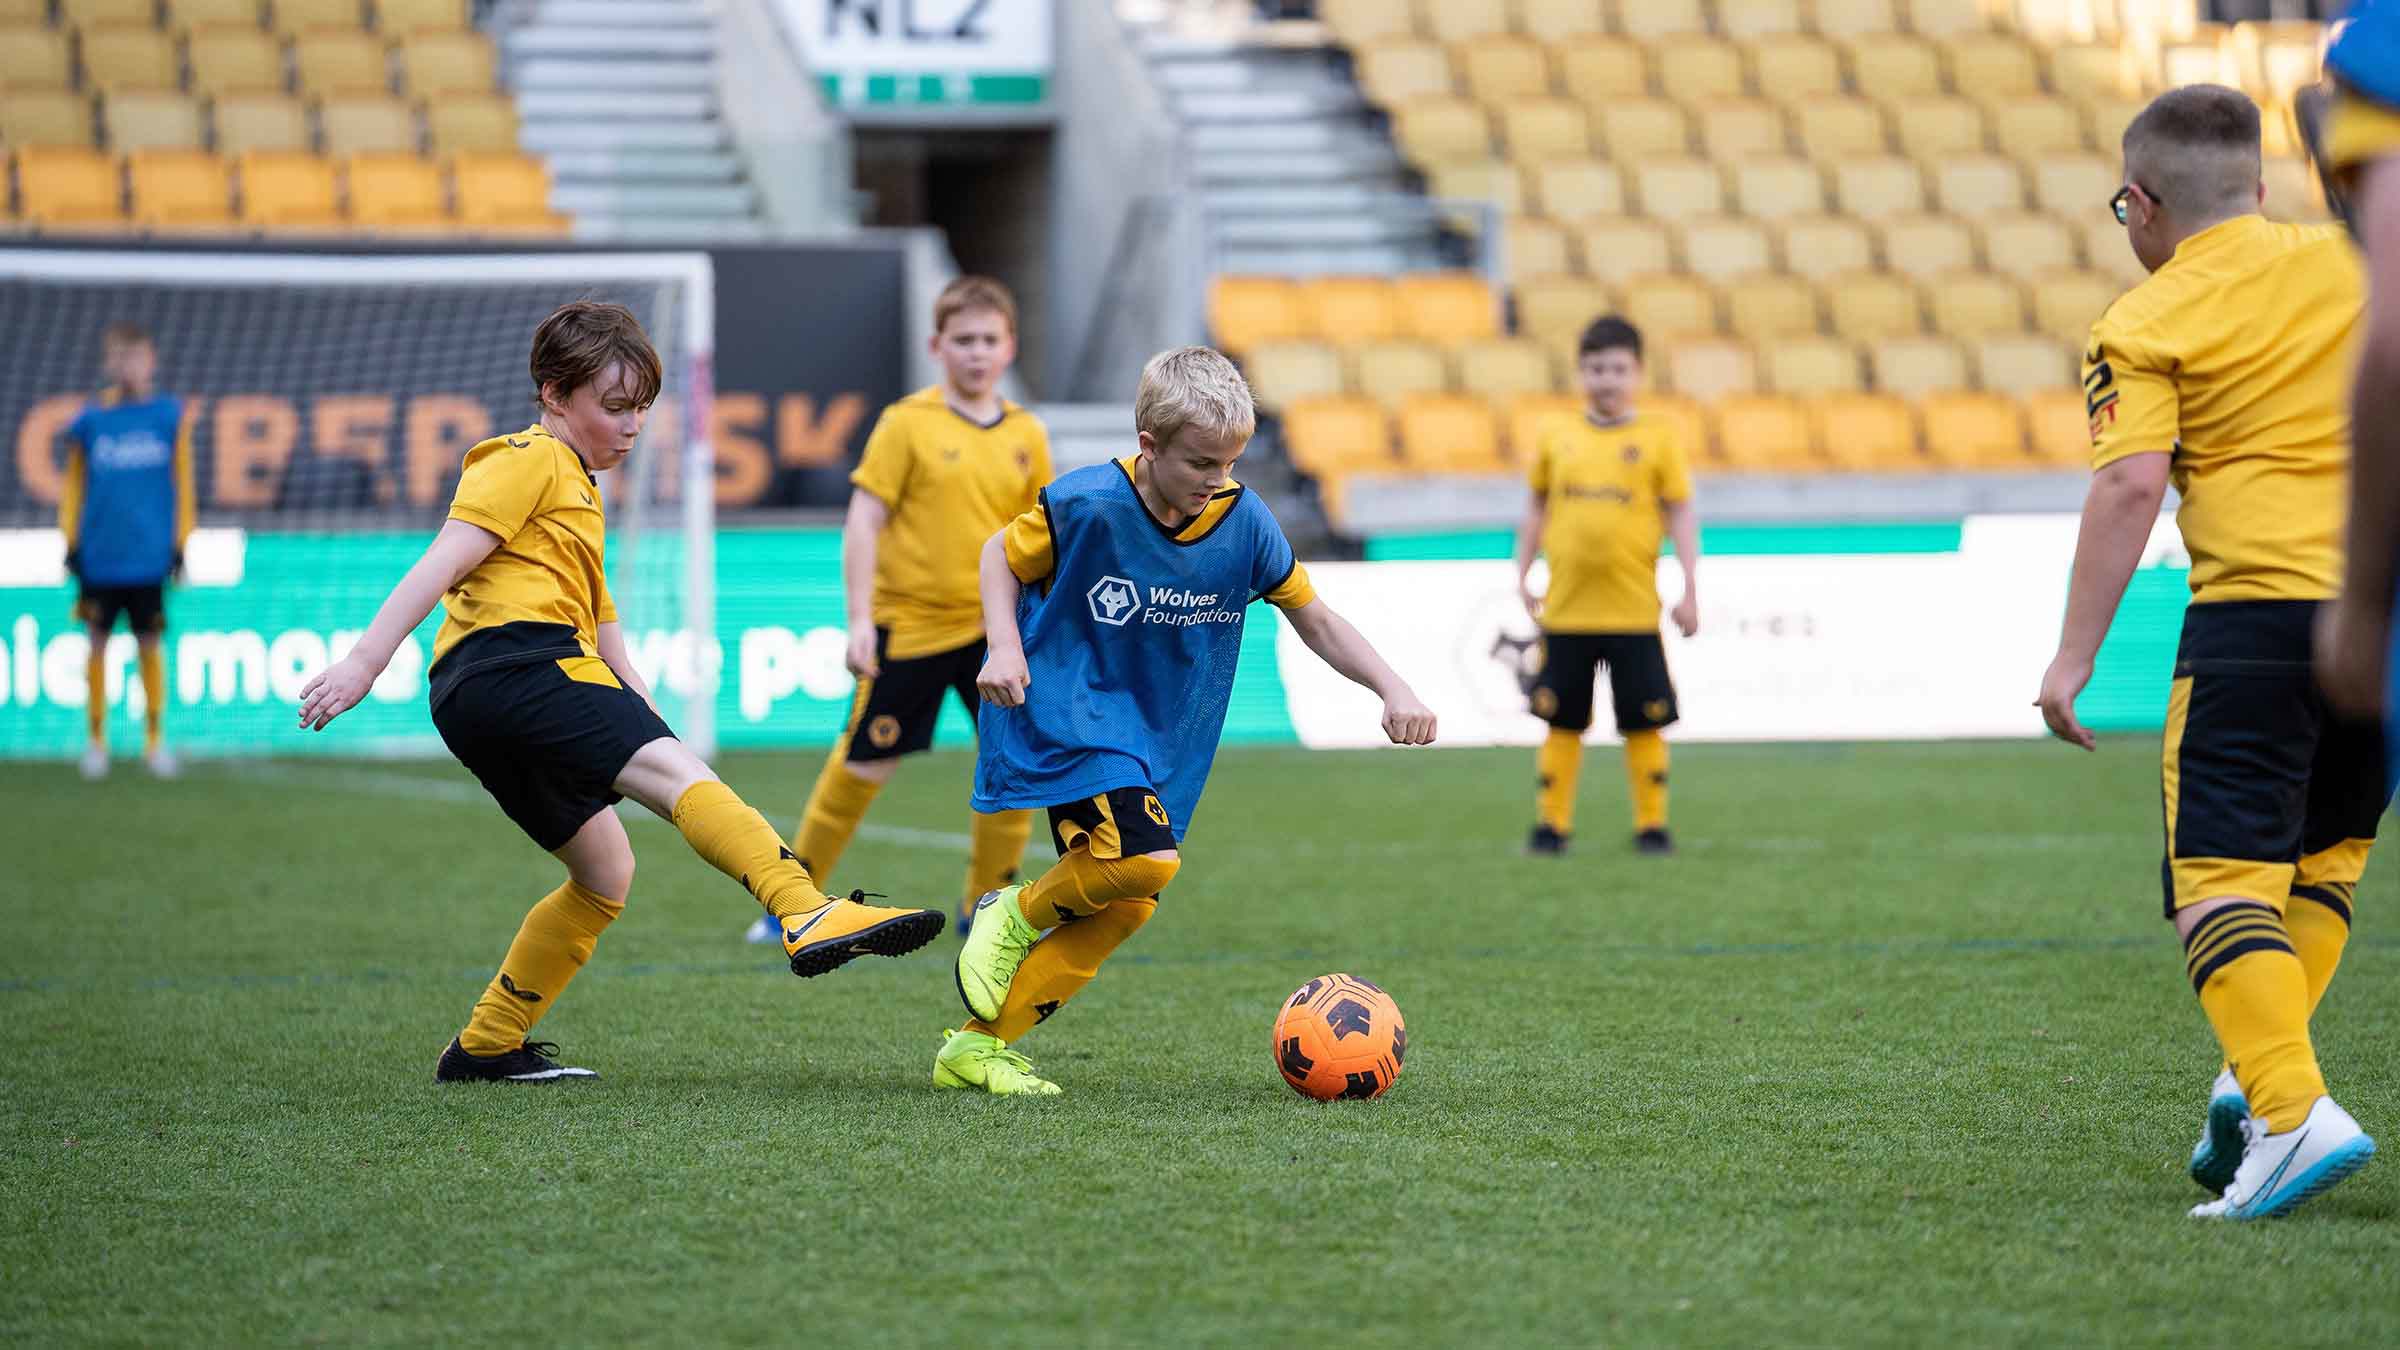 A decade of inspiration from Wolves Disability FC | Foundation | News